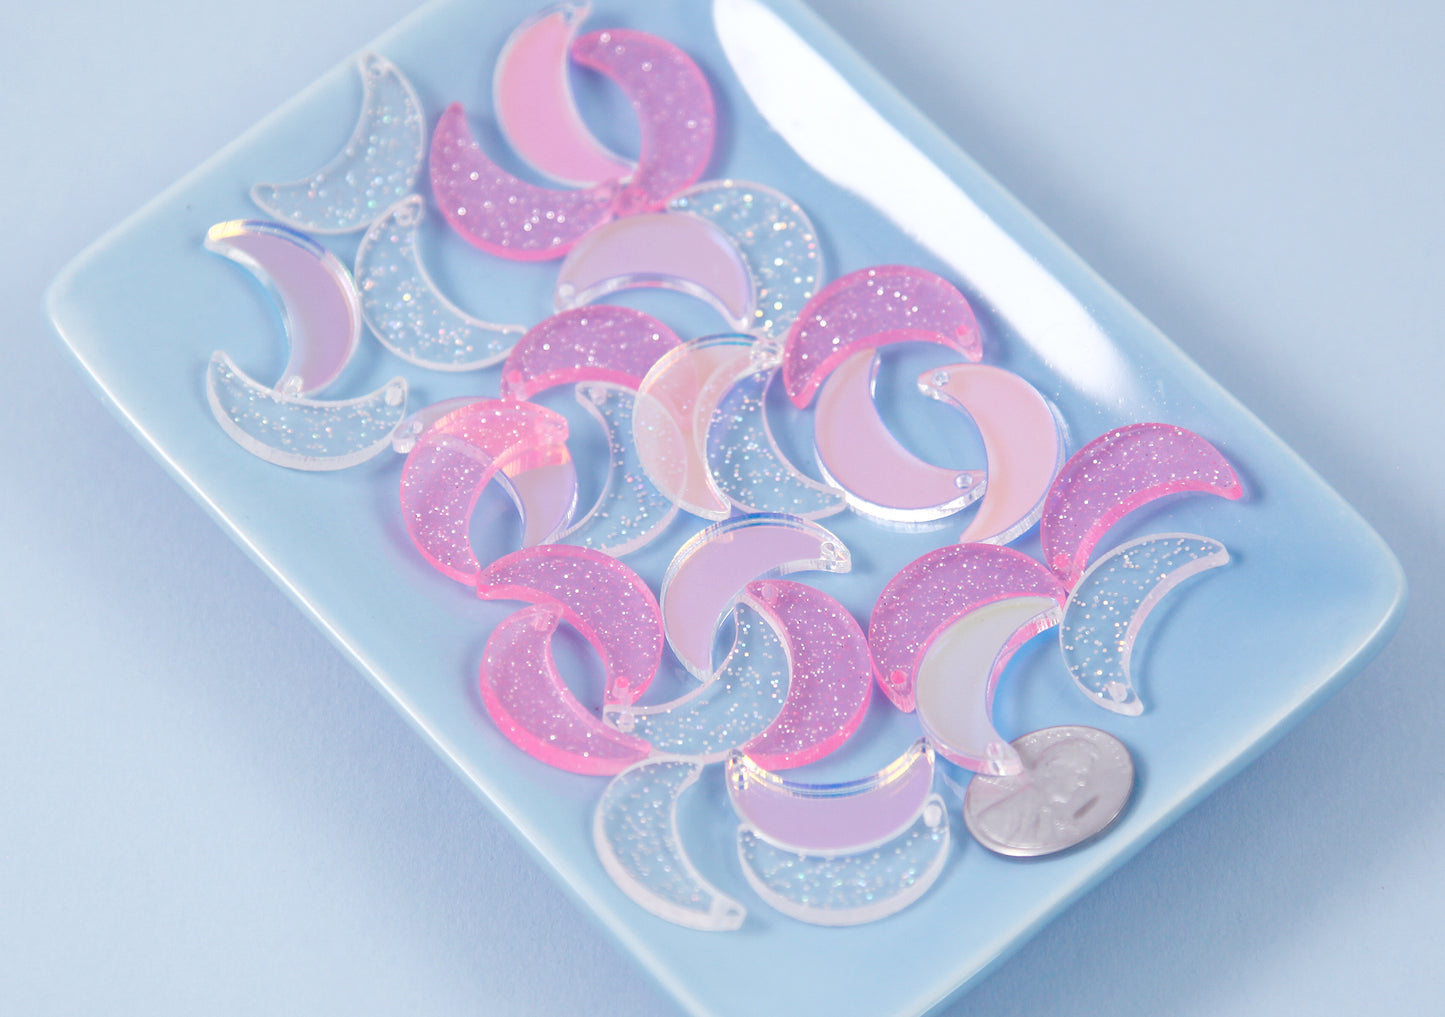 Moon Charms - 30mm Lovely Color Shift and Glitter Mix Moons Acrylic or Resin Charms - 12 pc set